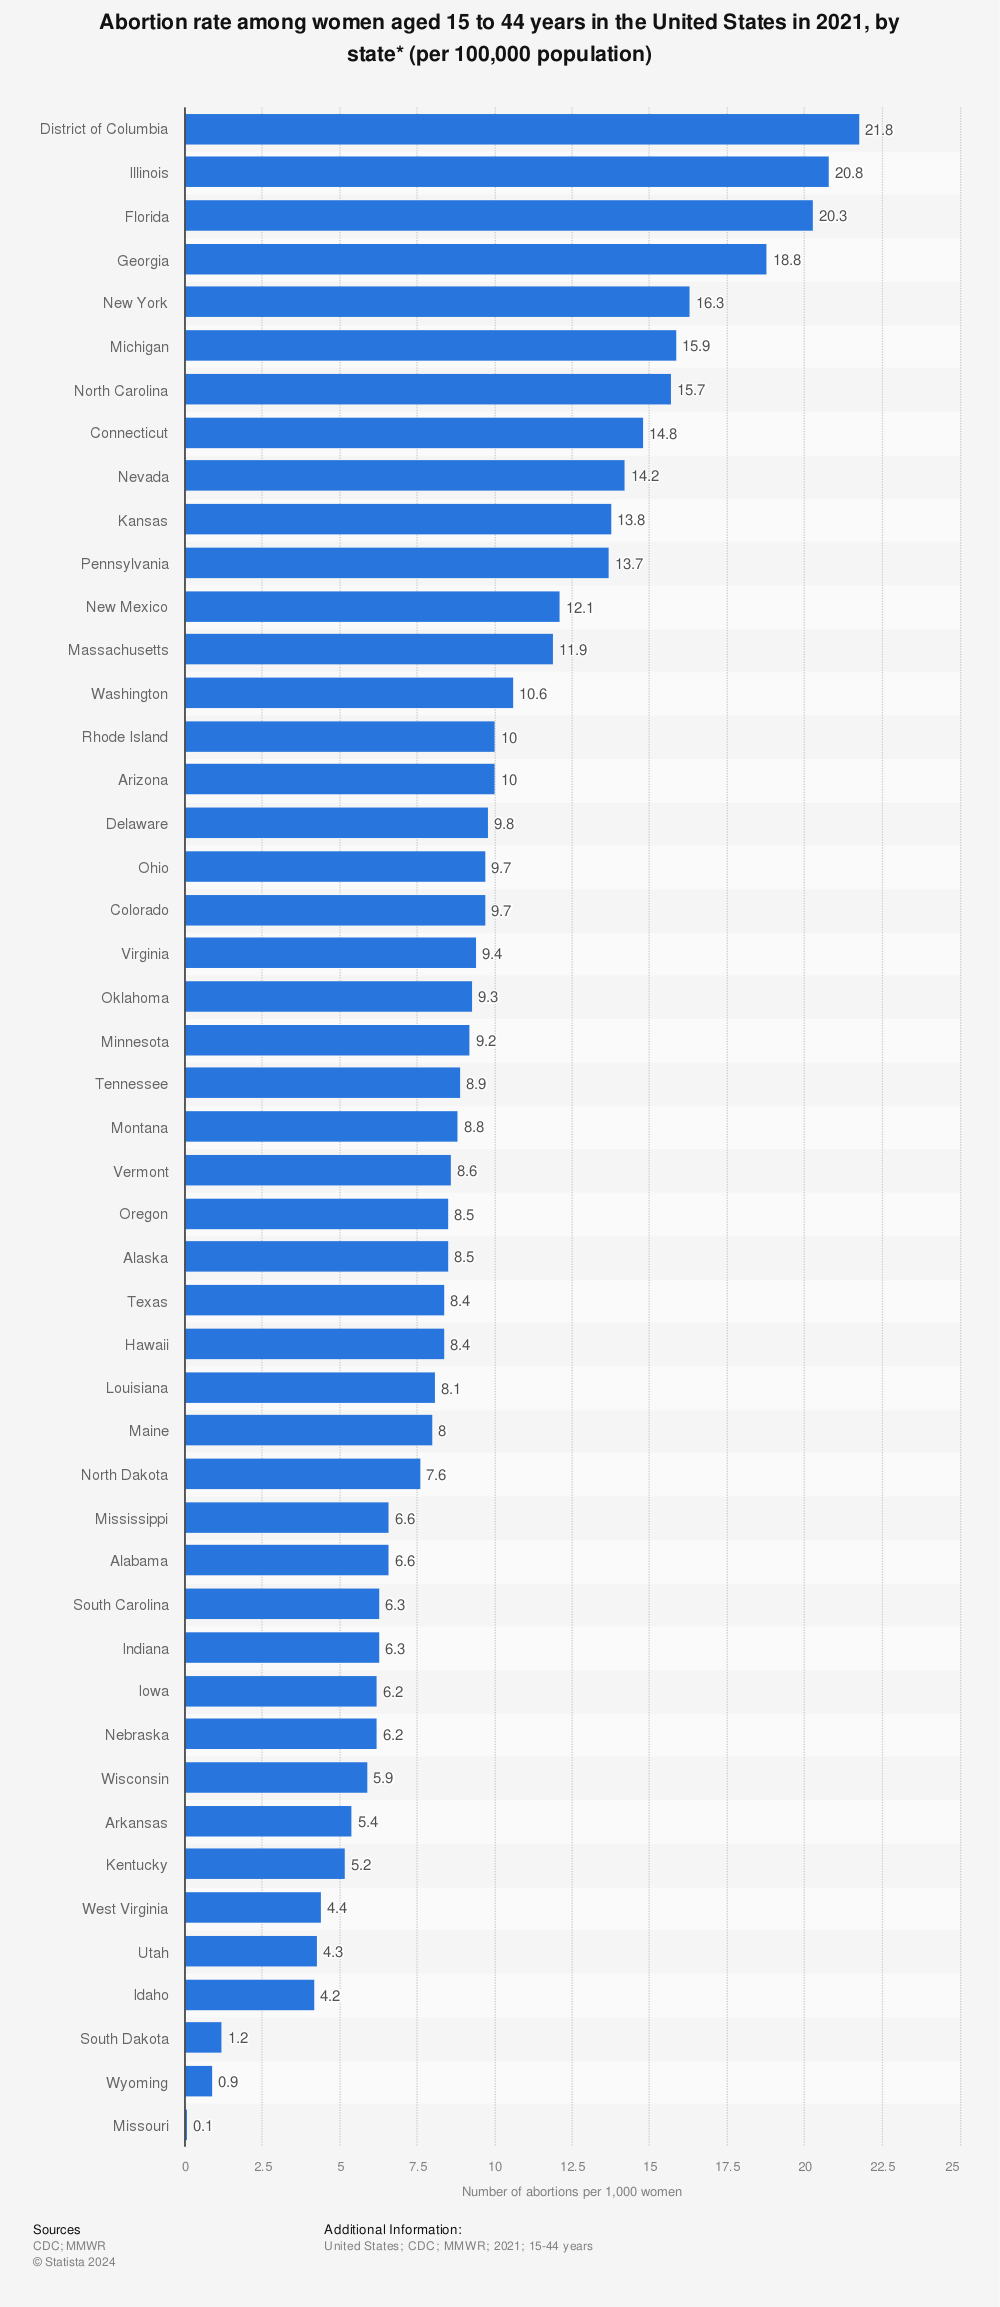 Statistic: Abortion rate among women aged 15 to 44 years in the United States in 2021, by state* (per 100,000 population) | Statista